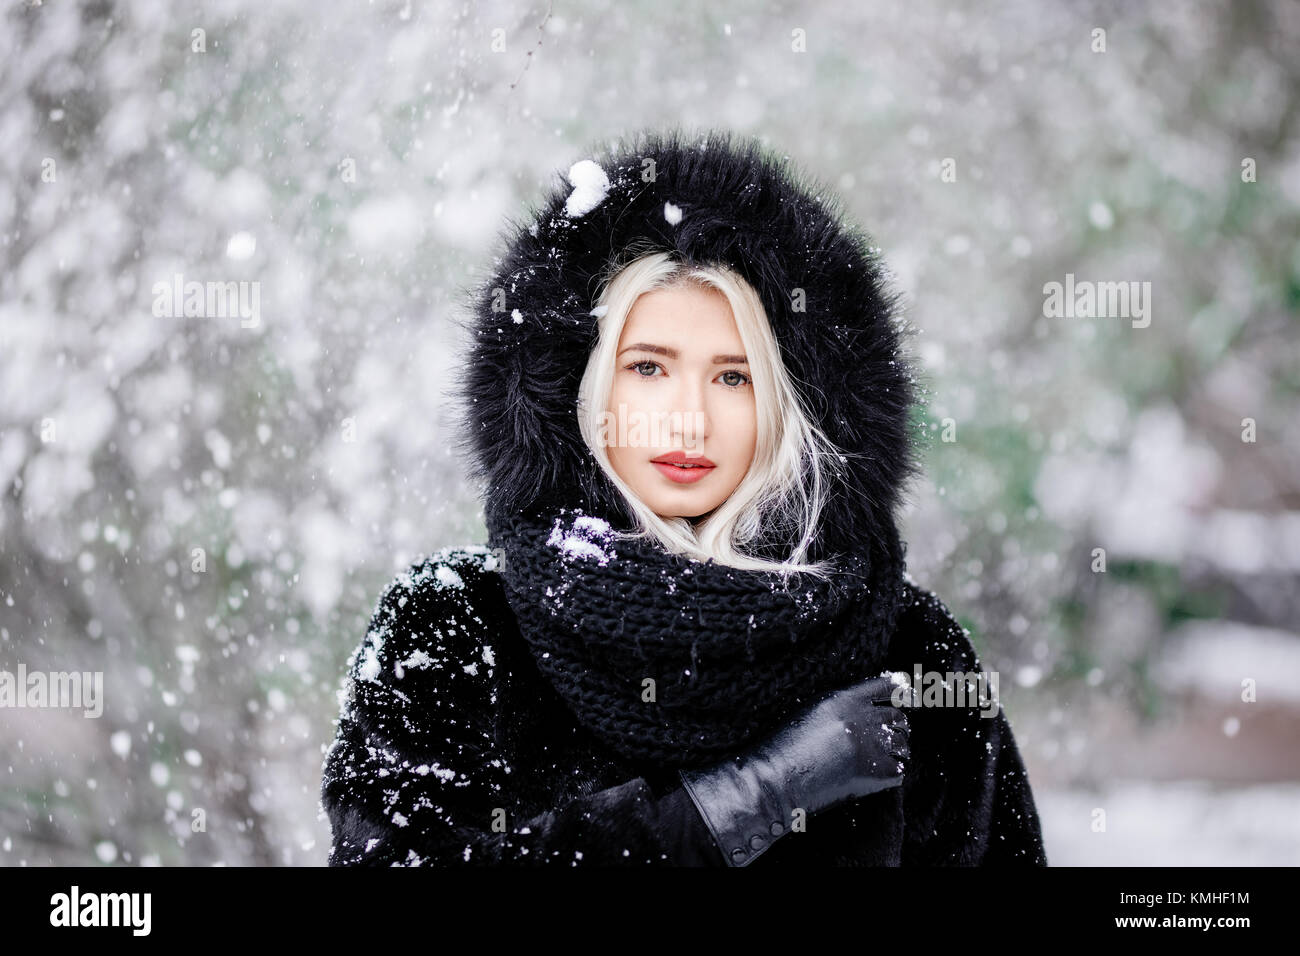 Portrait of beautiful blonde girl in a warm fur coat outdoor in a snowy forest. Stock Photo